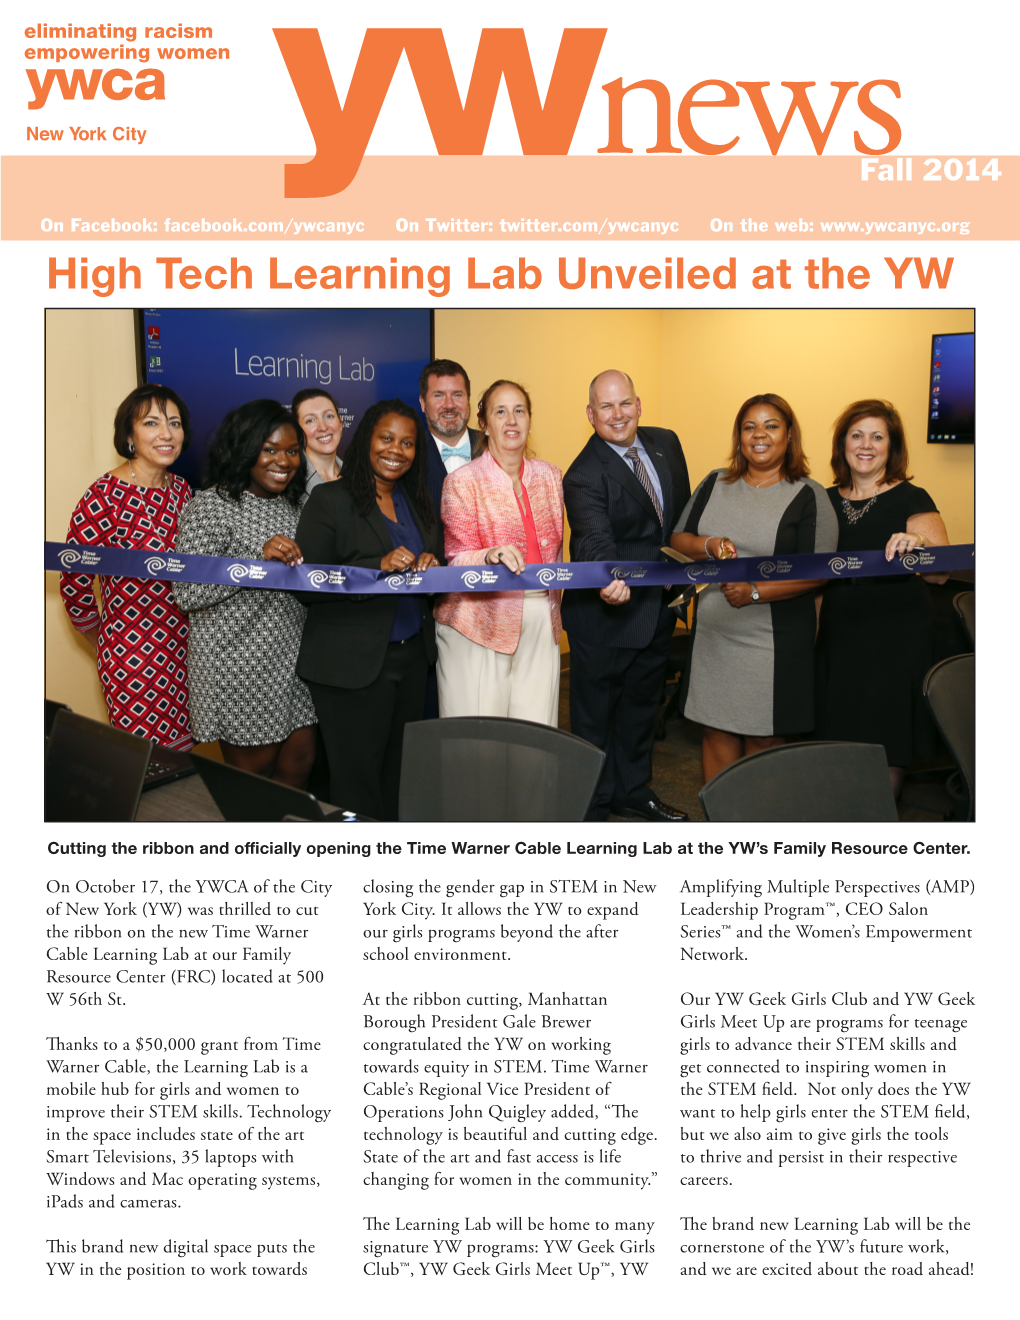 High Tech Learning Lab Unveiled at the YW